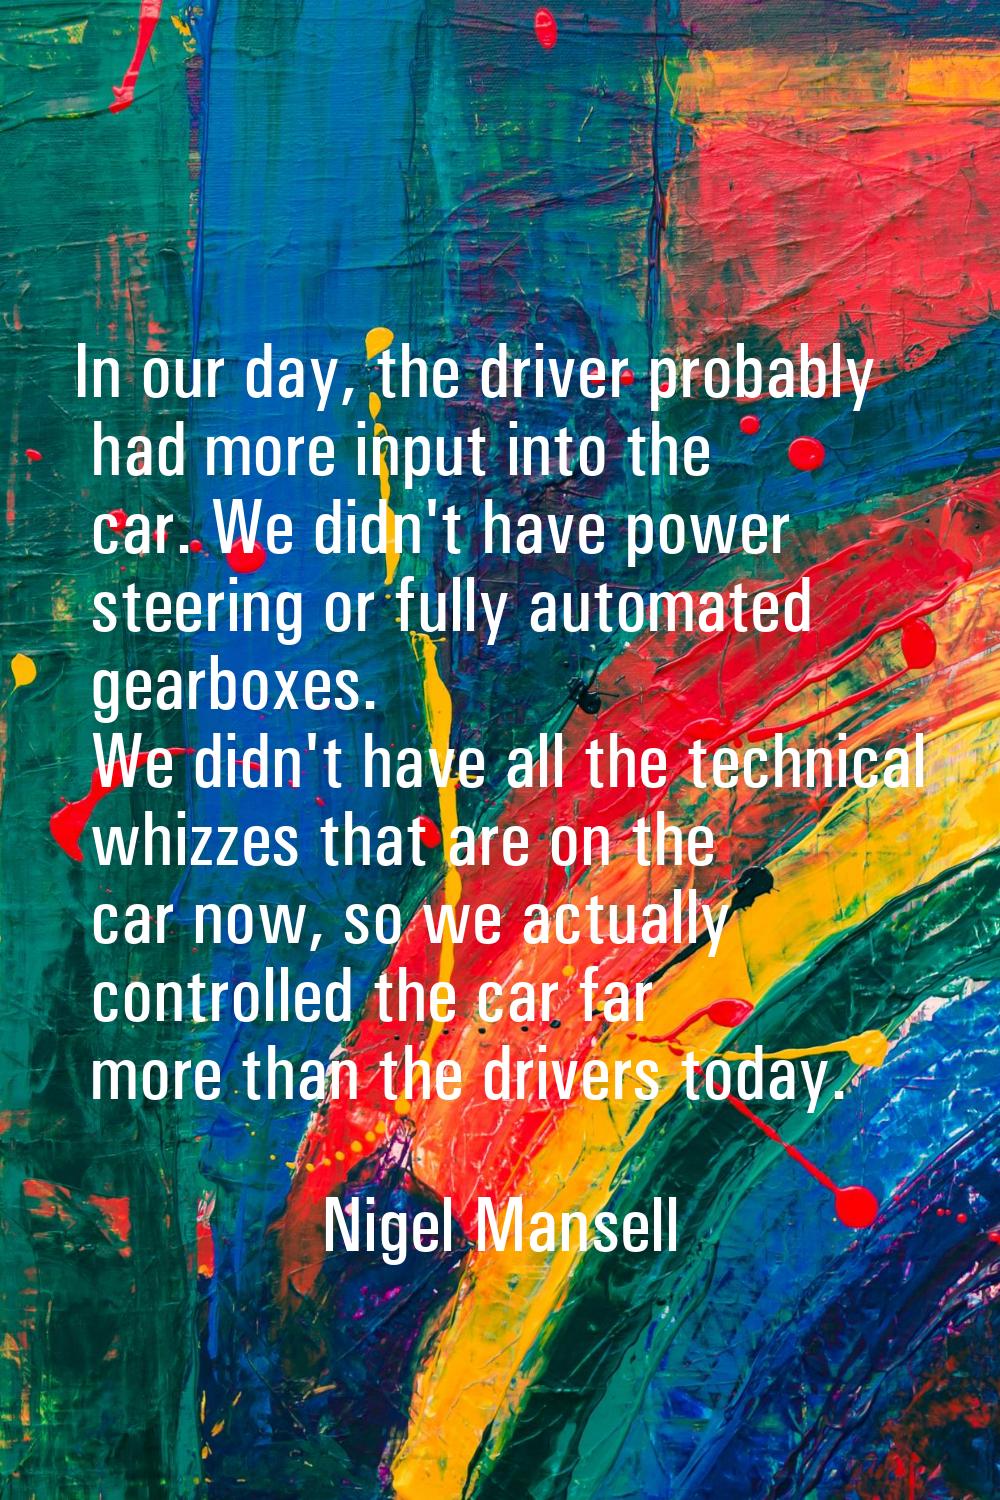 In our day, the driver probably had more input into the car. We didn't have power steering or fully